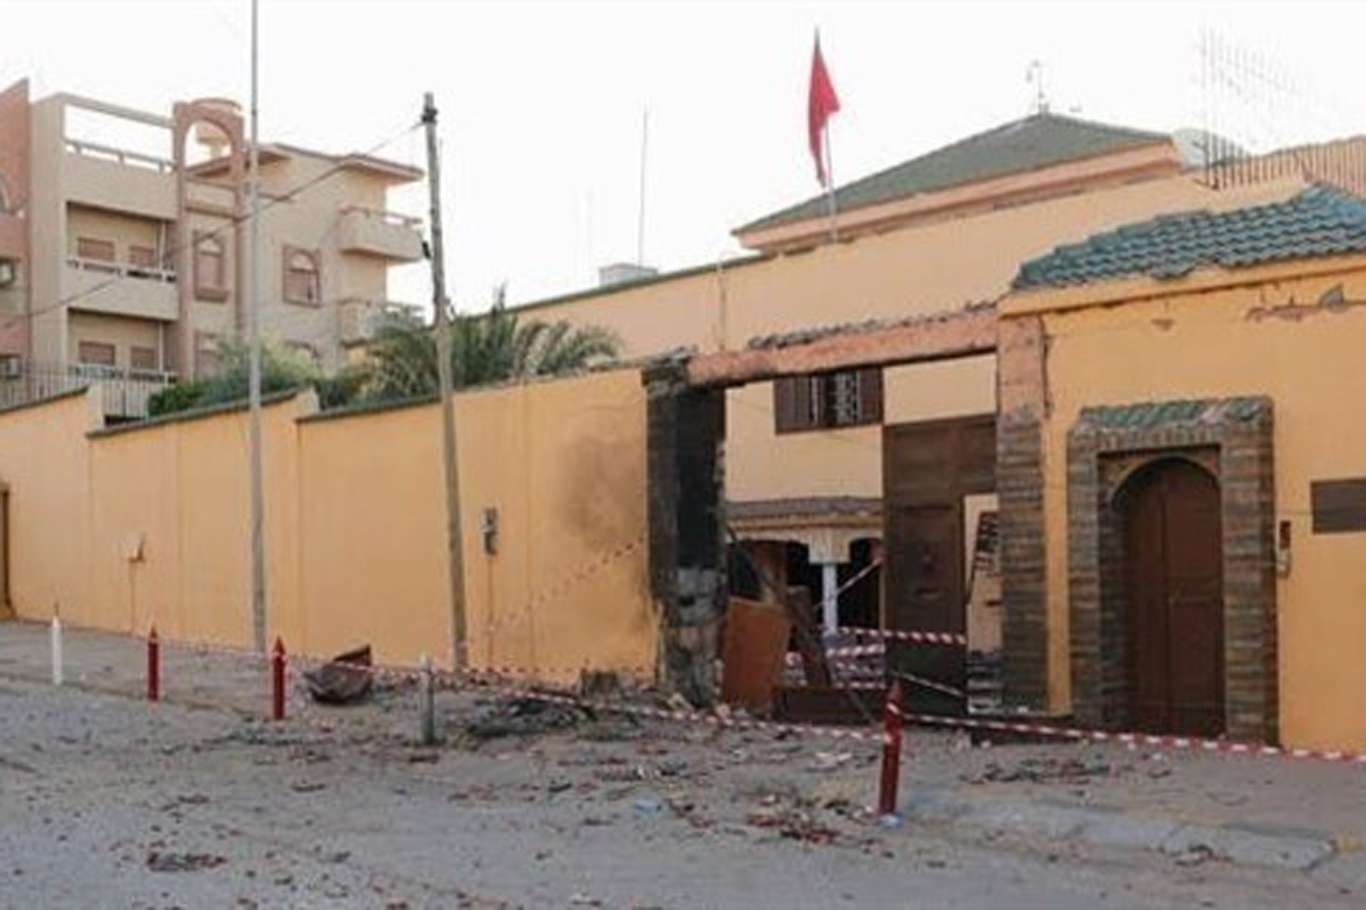 Morocco to re-open consulate in Tripoli after eight-year hiatus